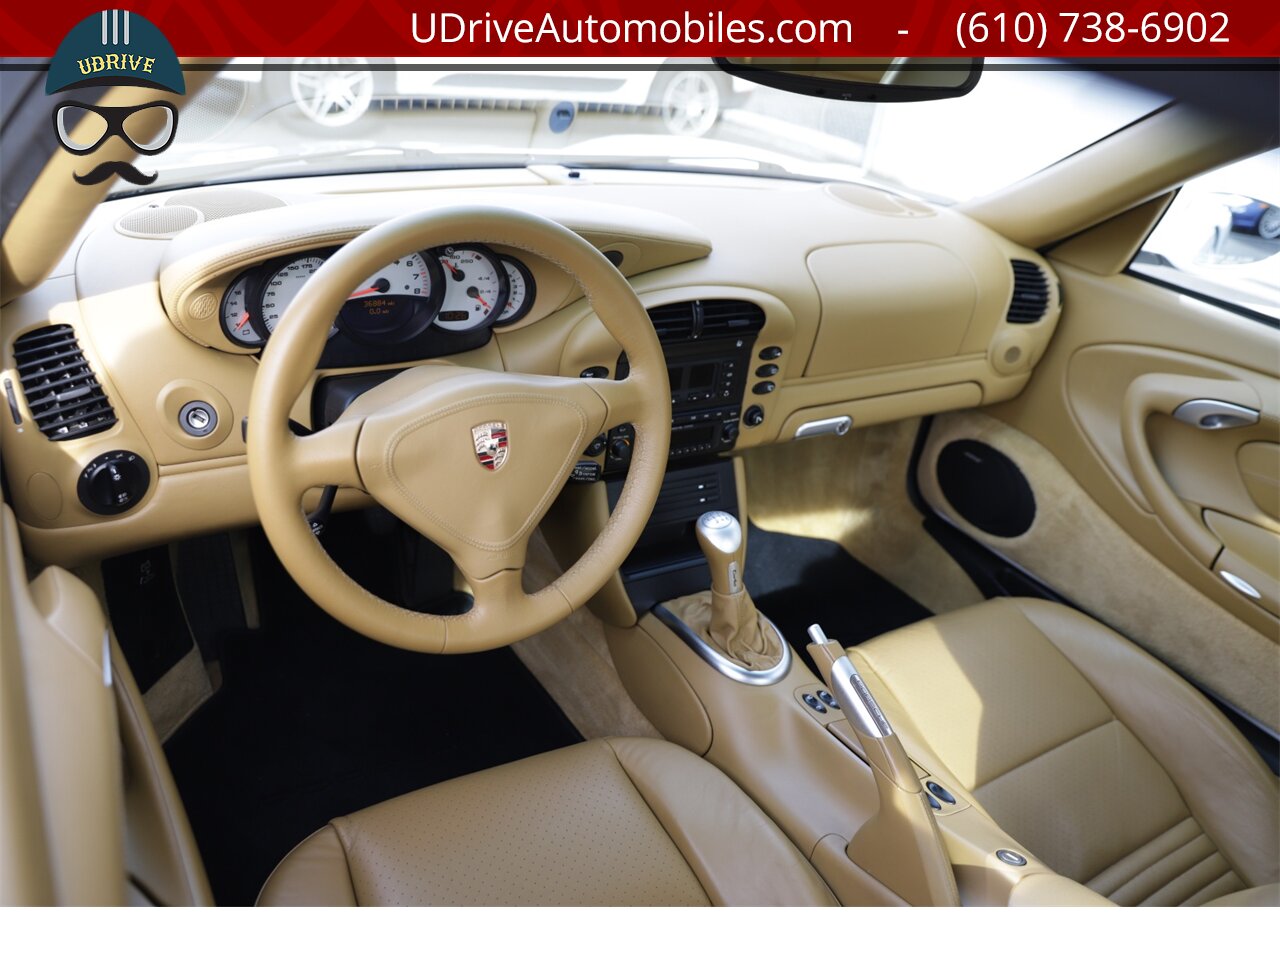 2003 Porsche 911 Turbo 996 6 Speed Carrara White Sport Seats  Detailed Service History - Photo 28 - West Chester, PA 19382